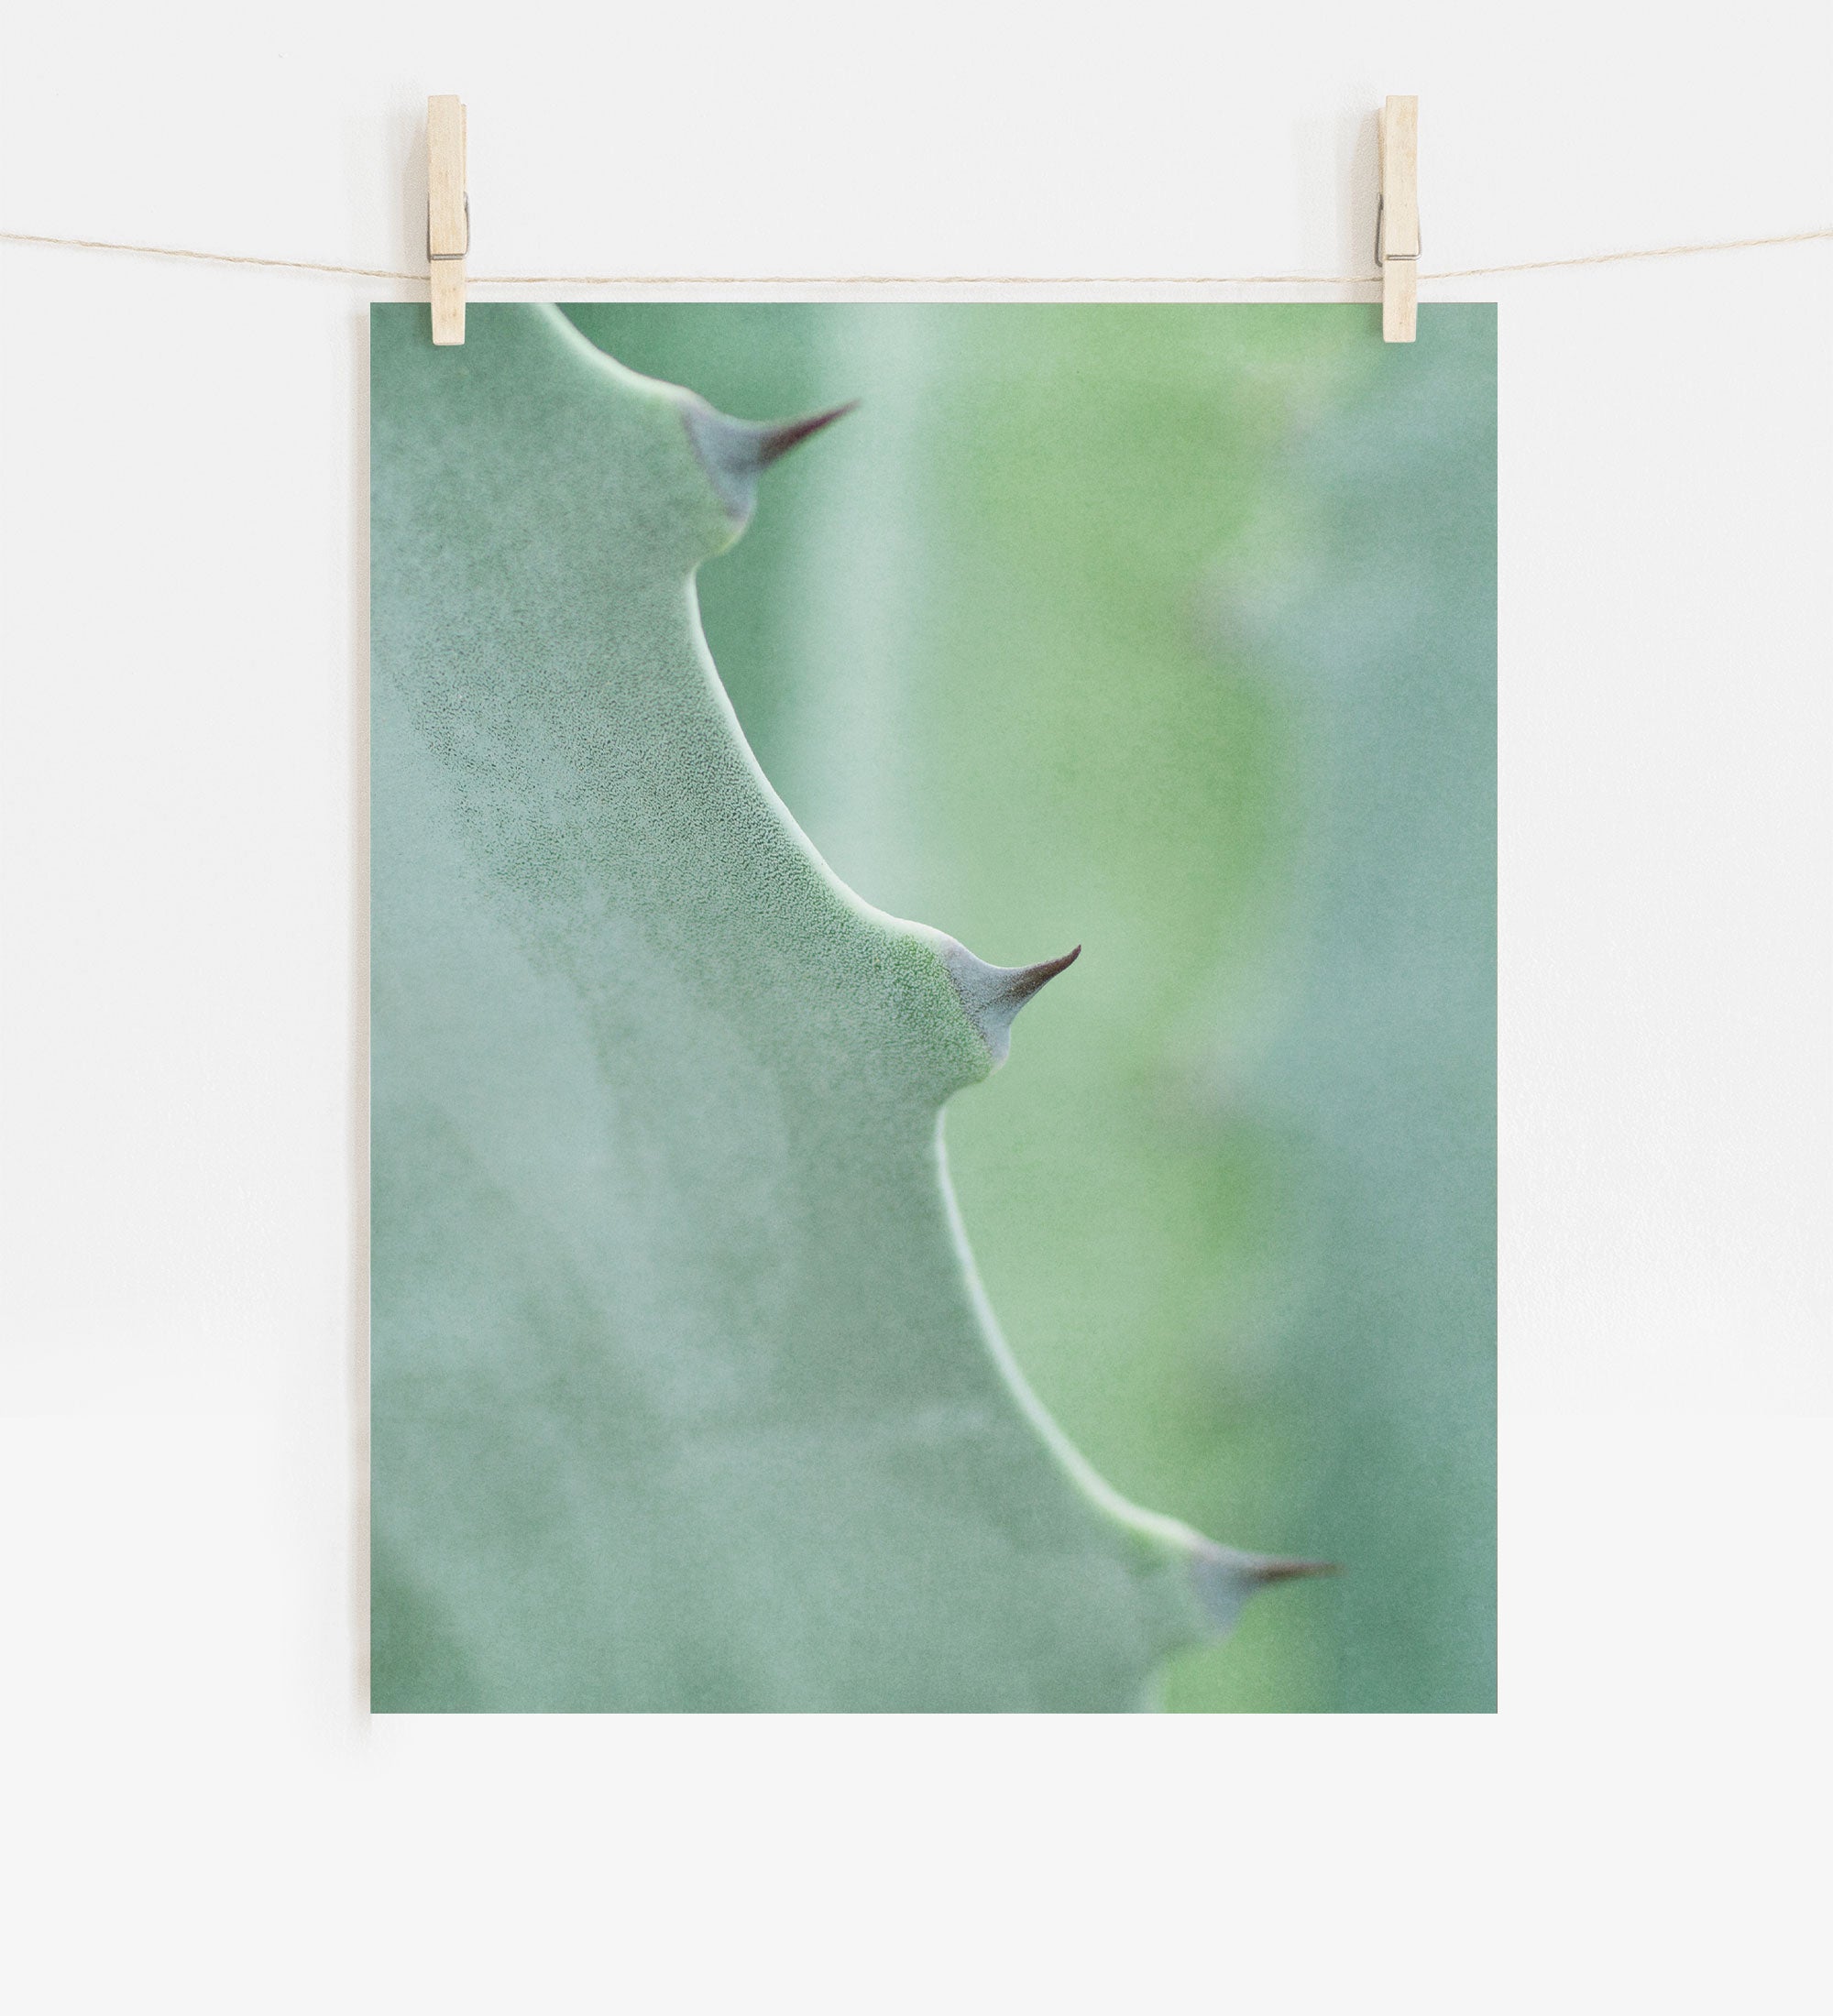 A close-up photo of a green Offley Green Botanical Print, &#39;Aloe Vera Spikes II&#39; leaf with sharp thorns, hung by clothespins on a string against a blurred background.